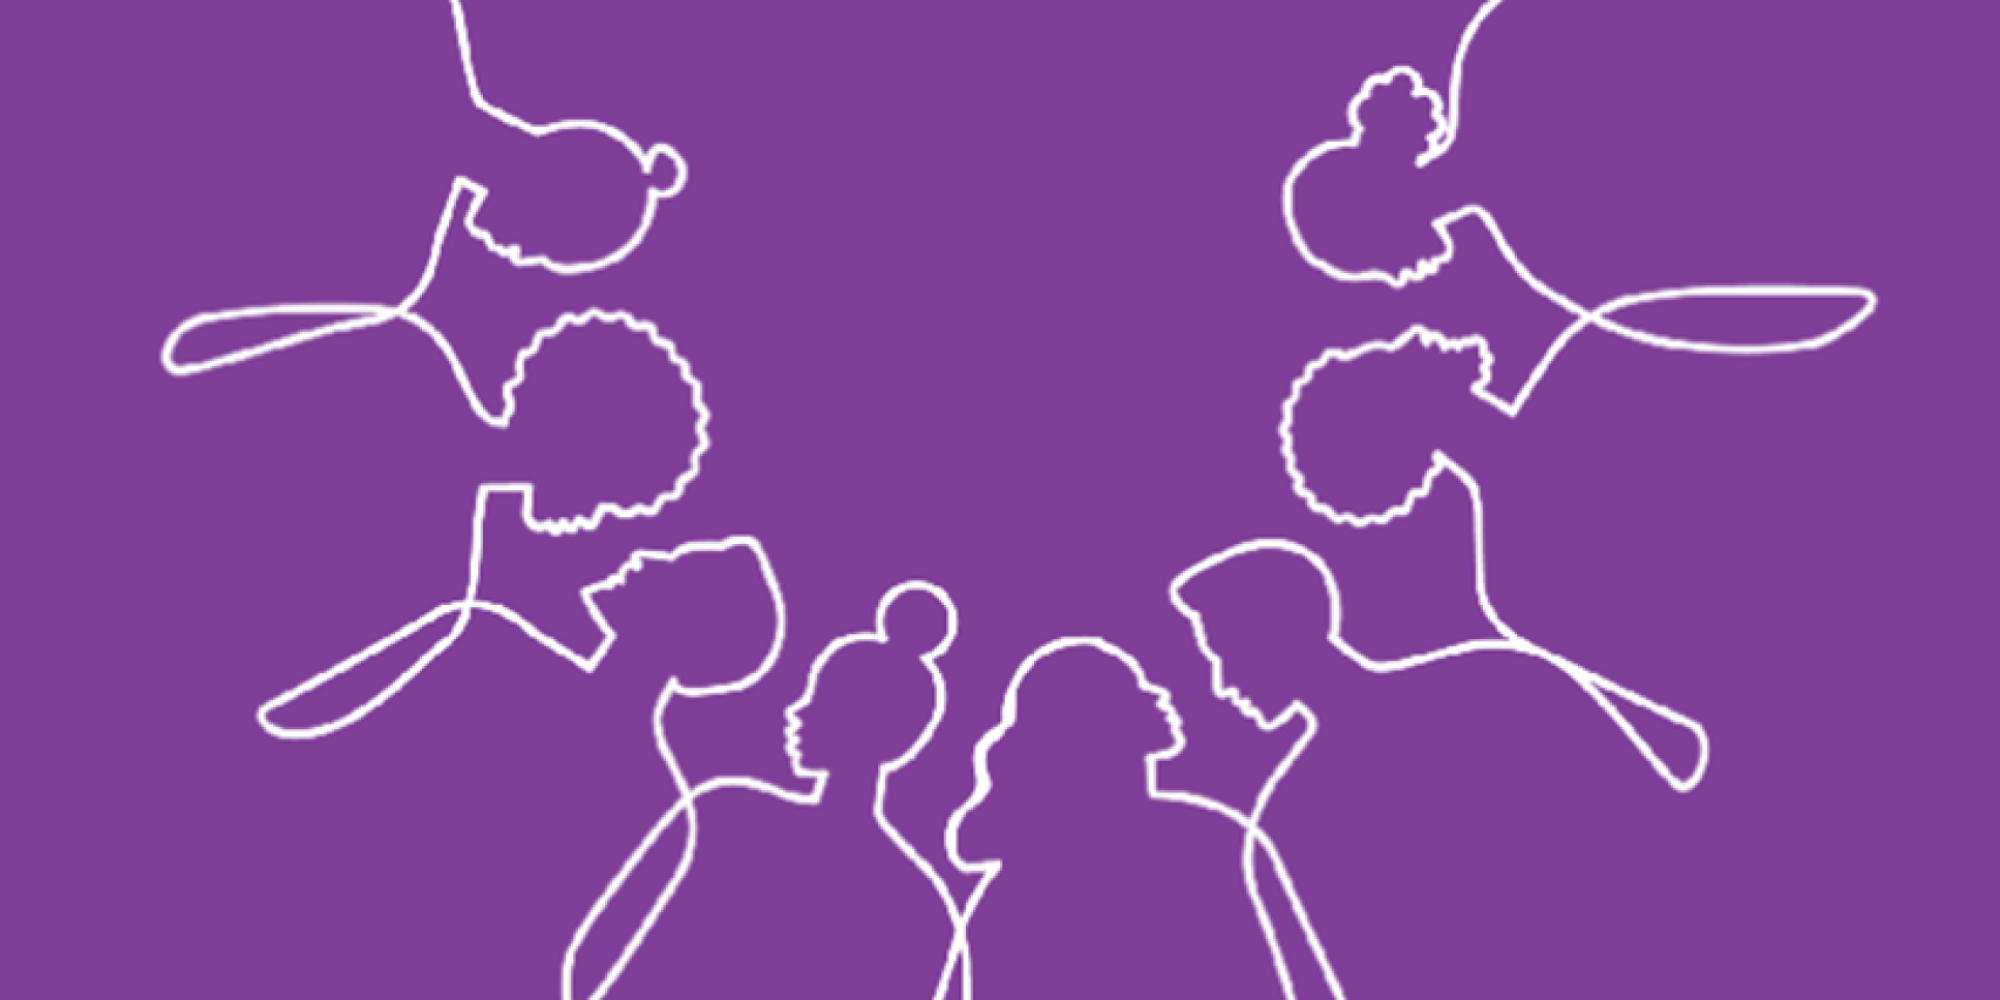 Purple background, white line drawing of people working together